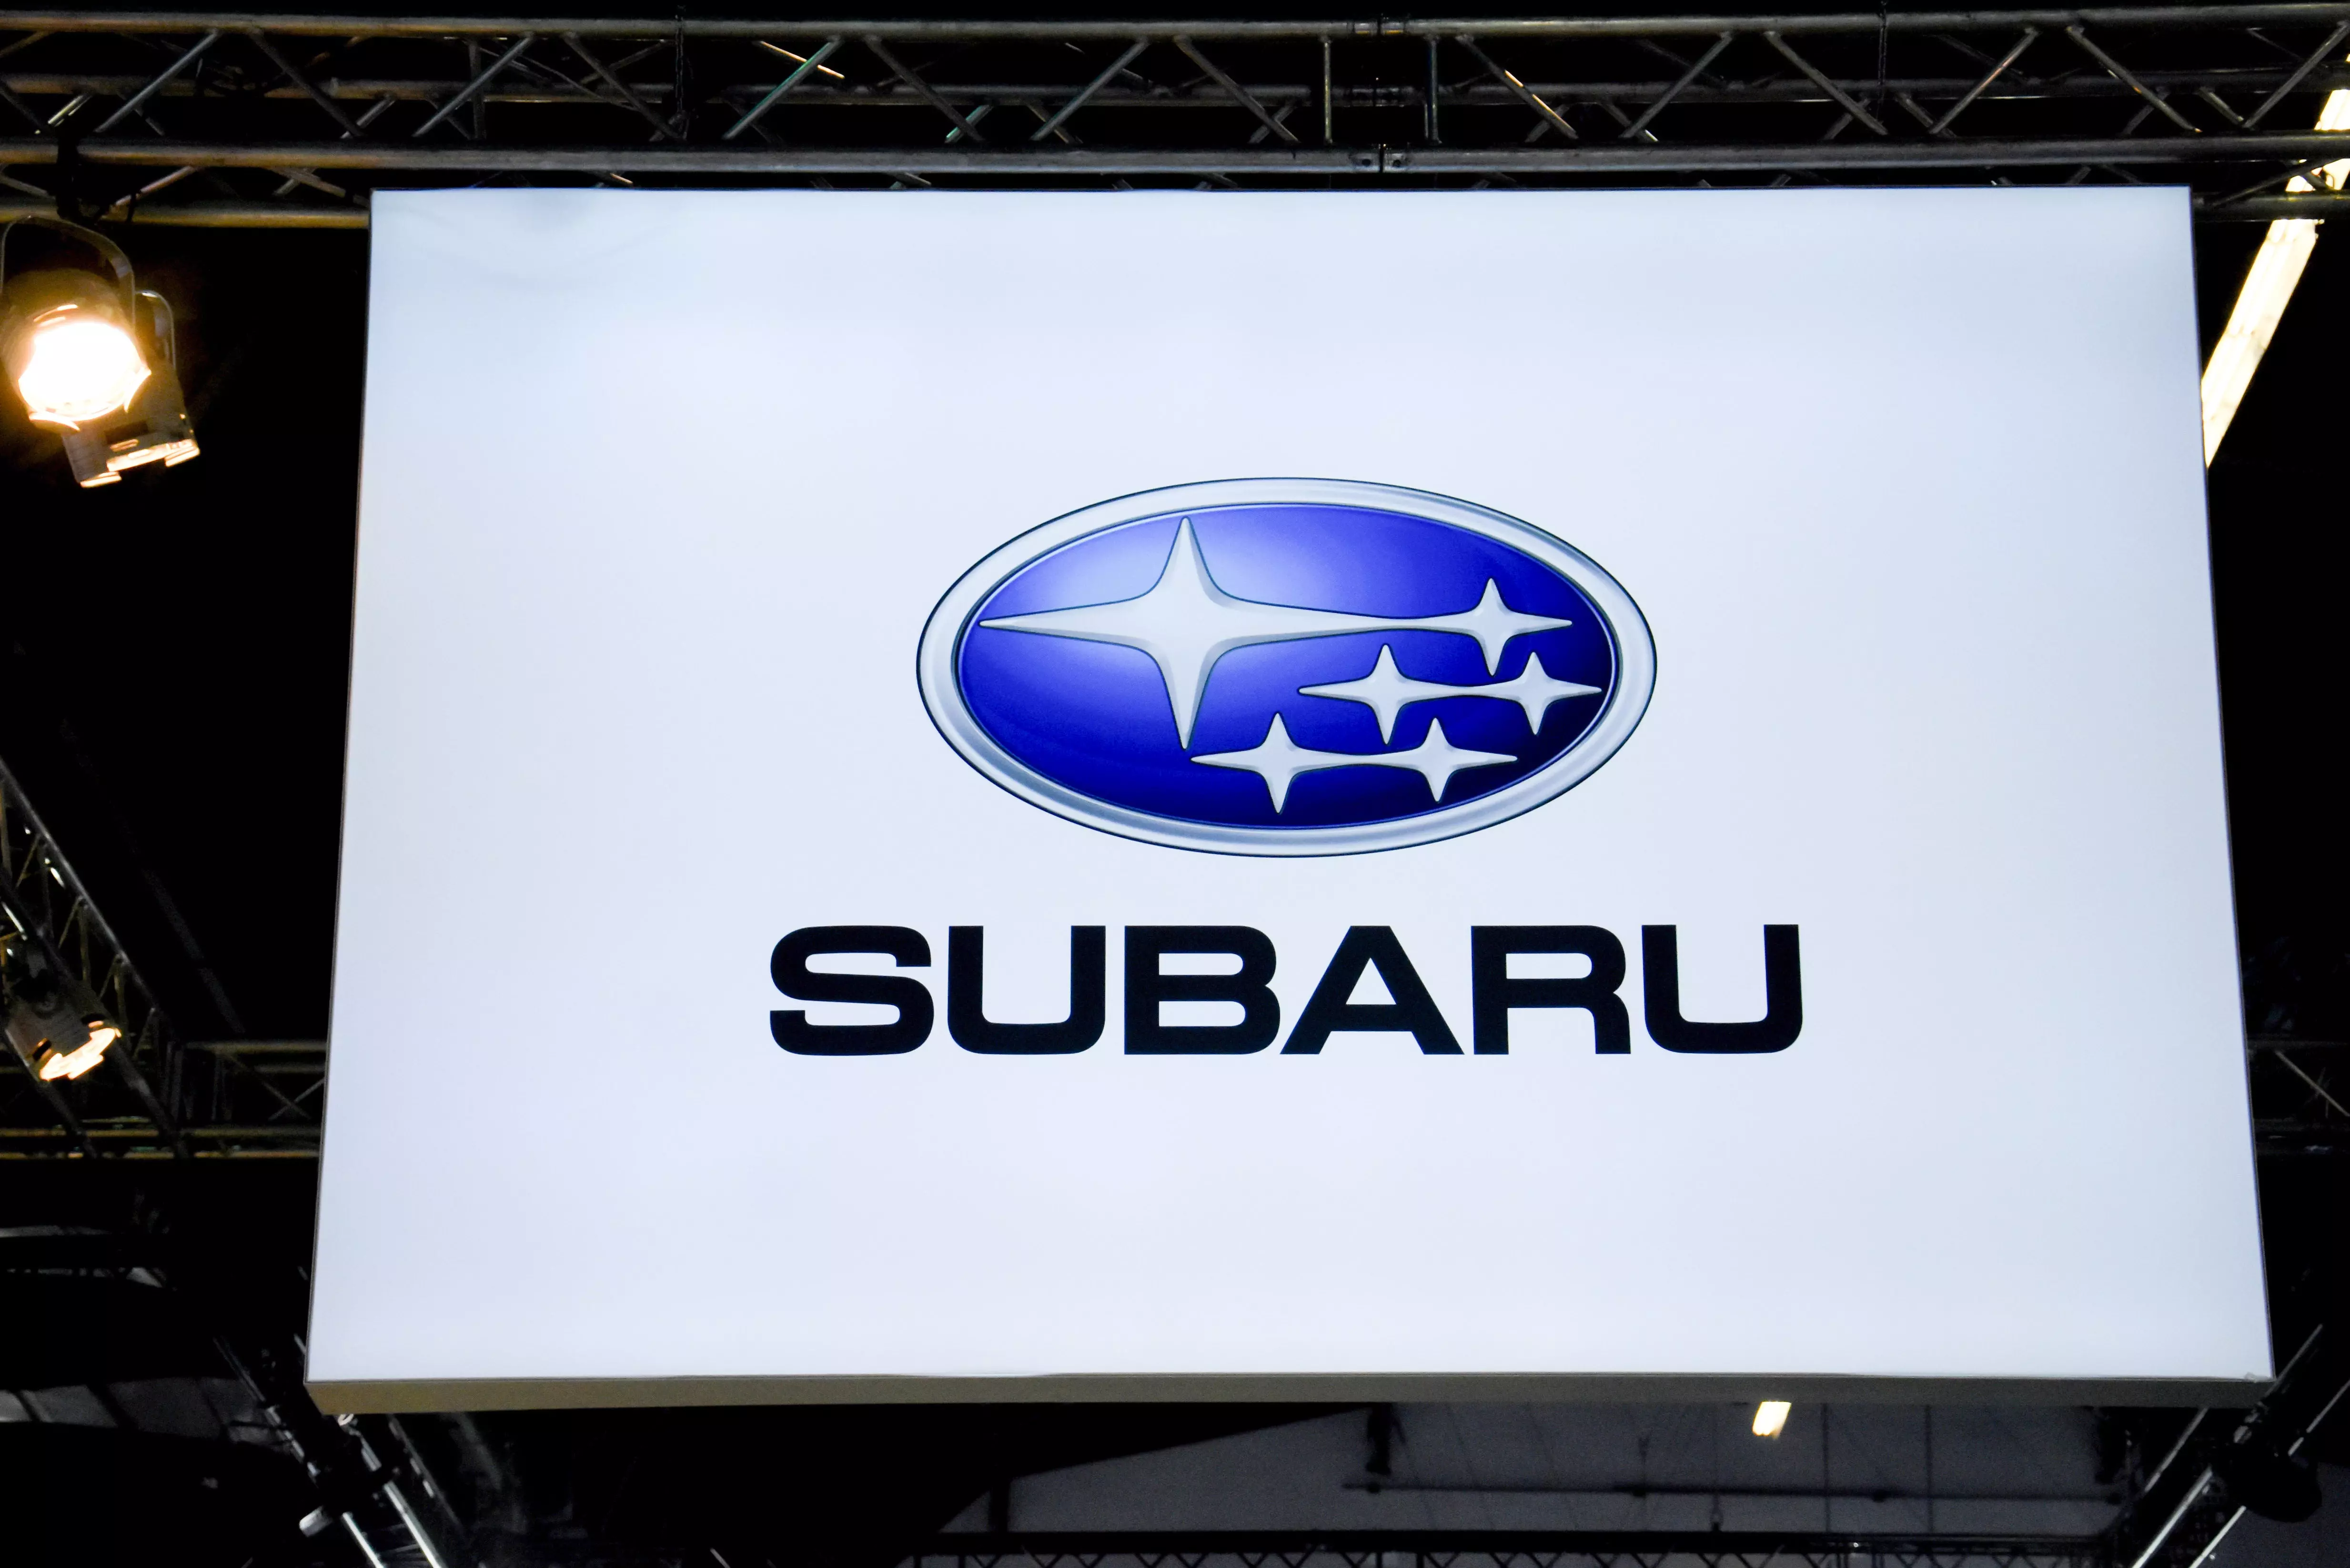 Subaru’s Extended Warranty Provides Some Peace of Mind | Autance